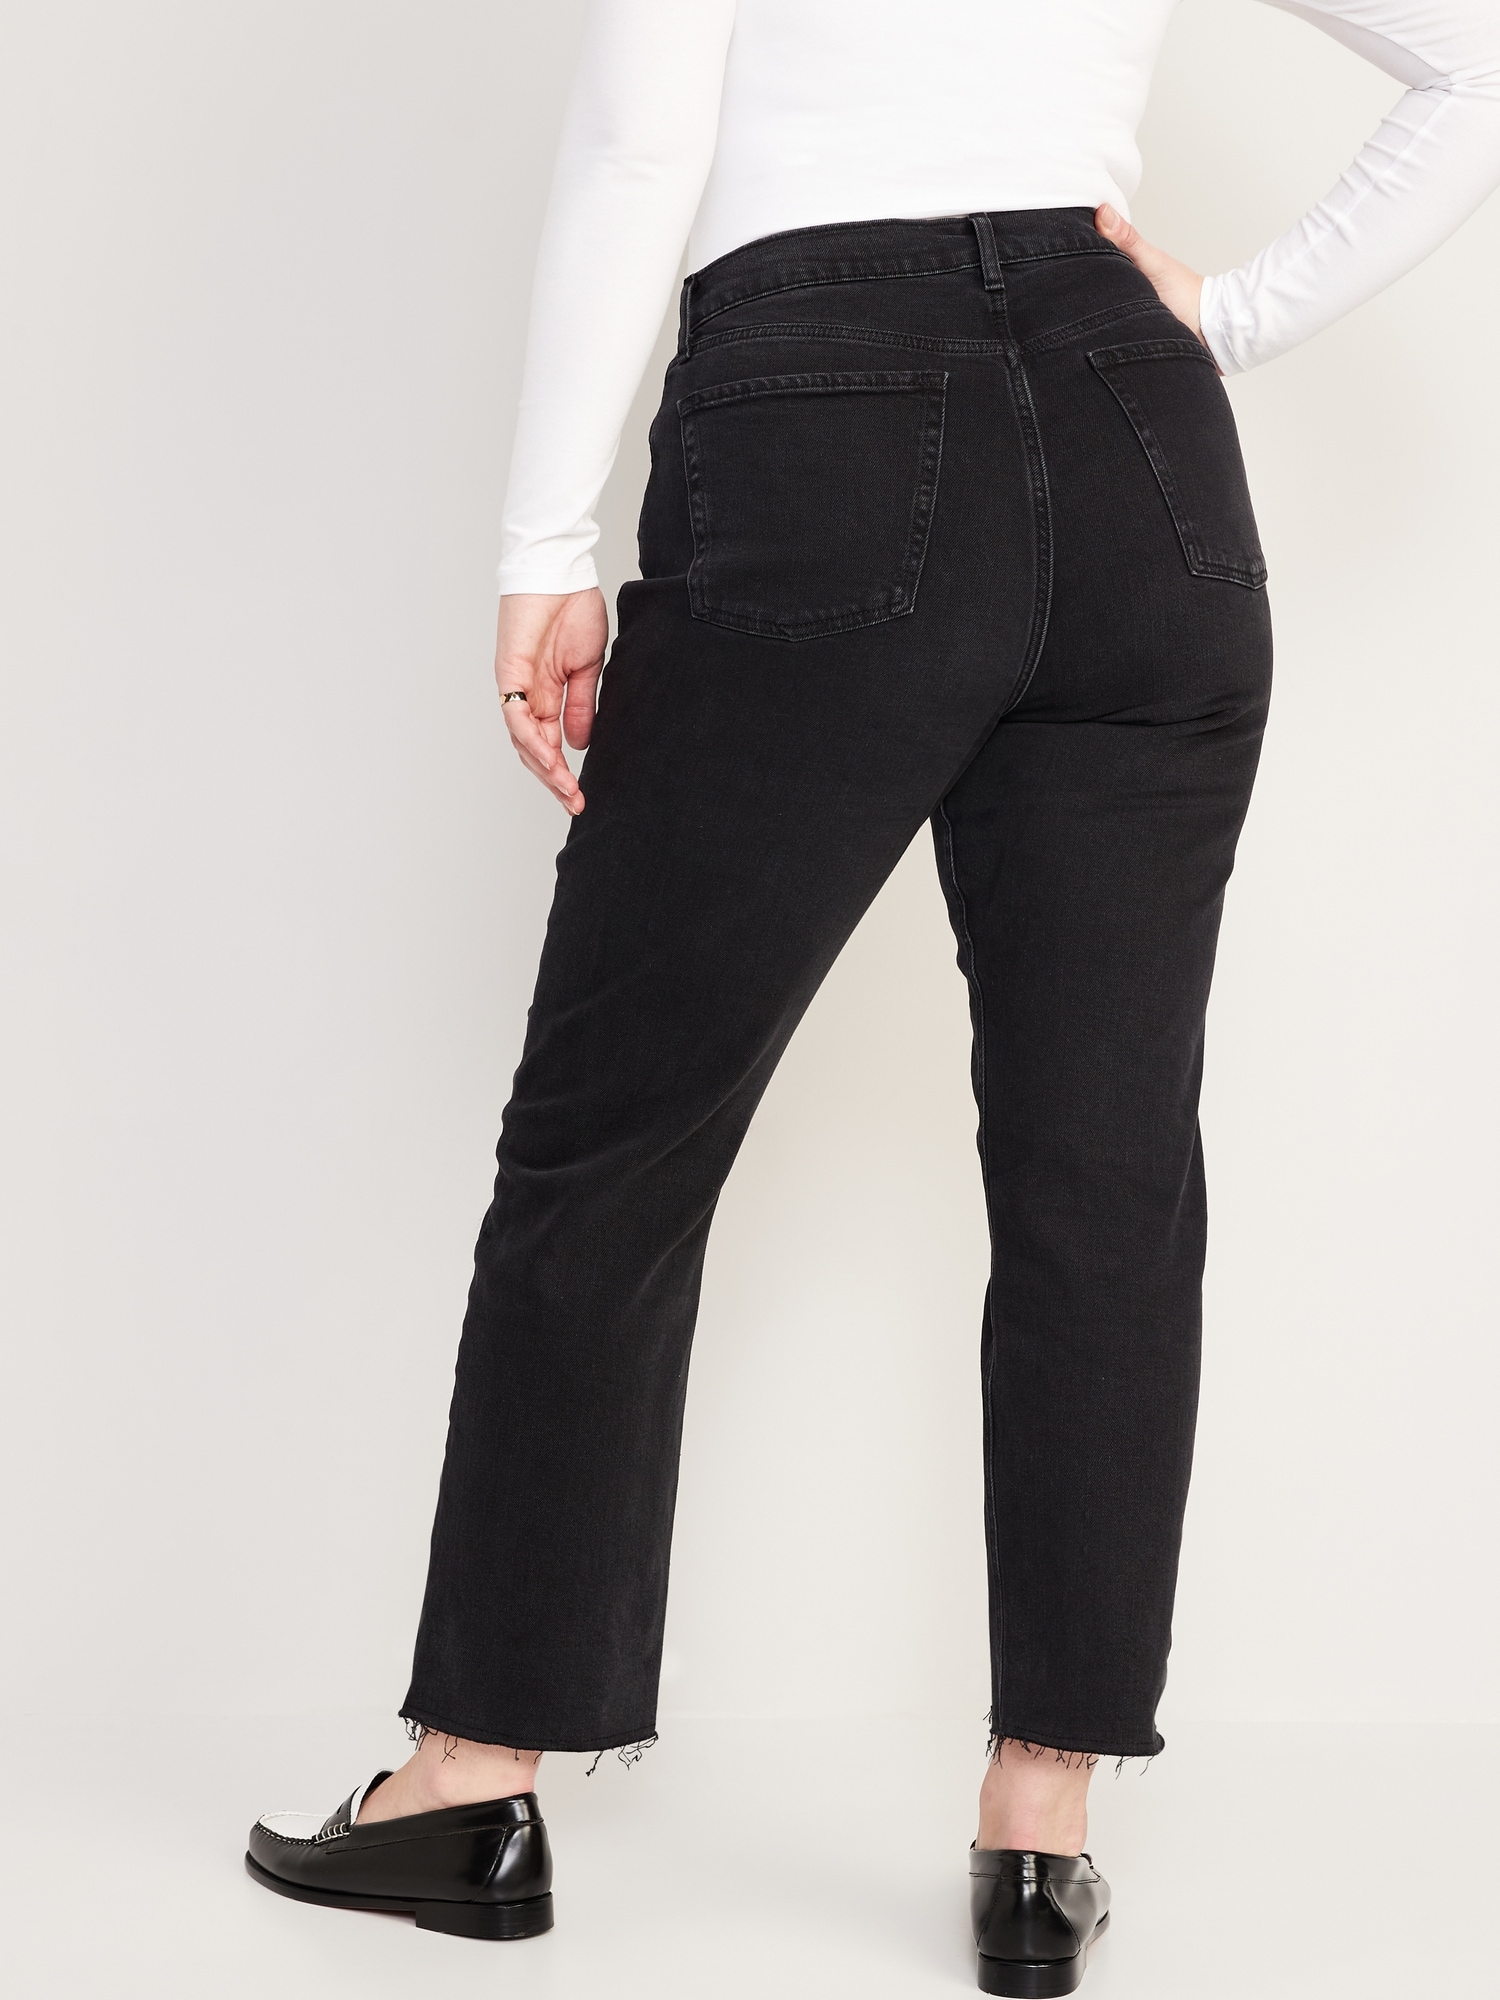 Extra High-Waisted Button-Fly Sky-Hi Straight Cut-Off Black Jeans for ...